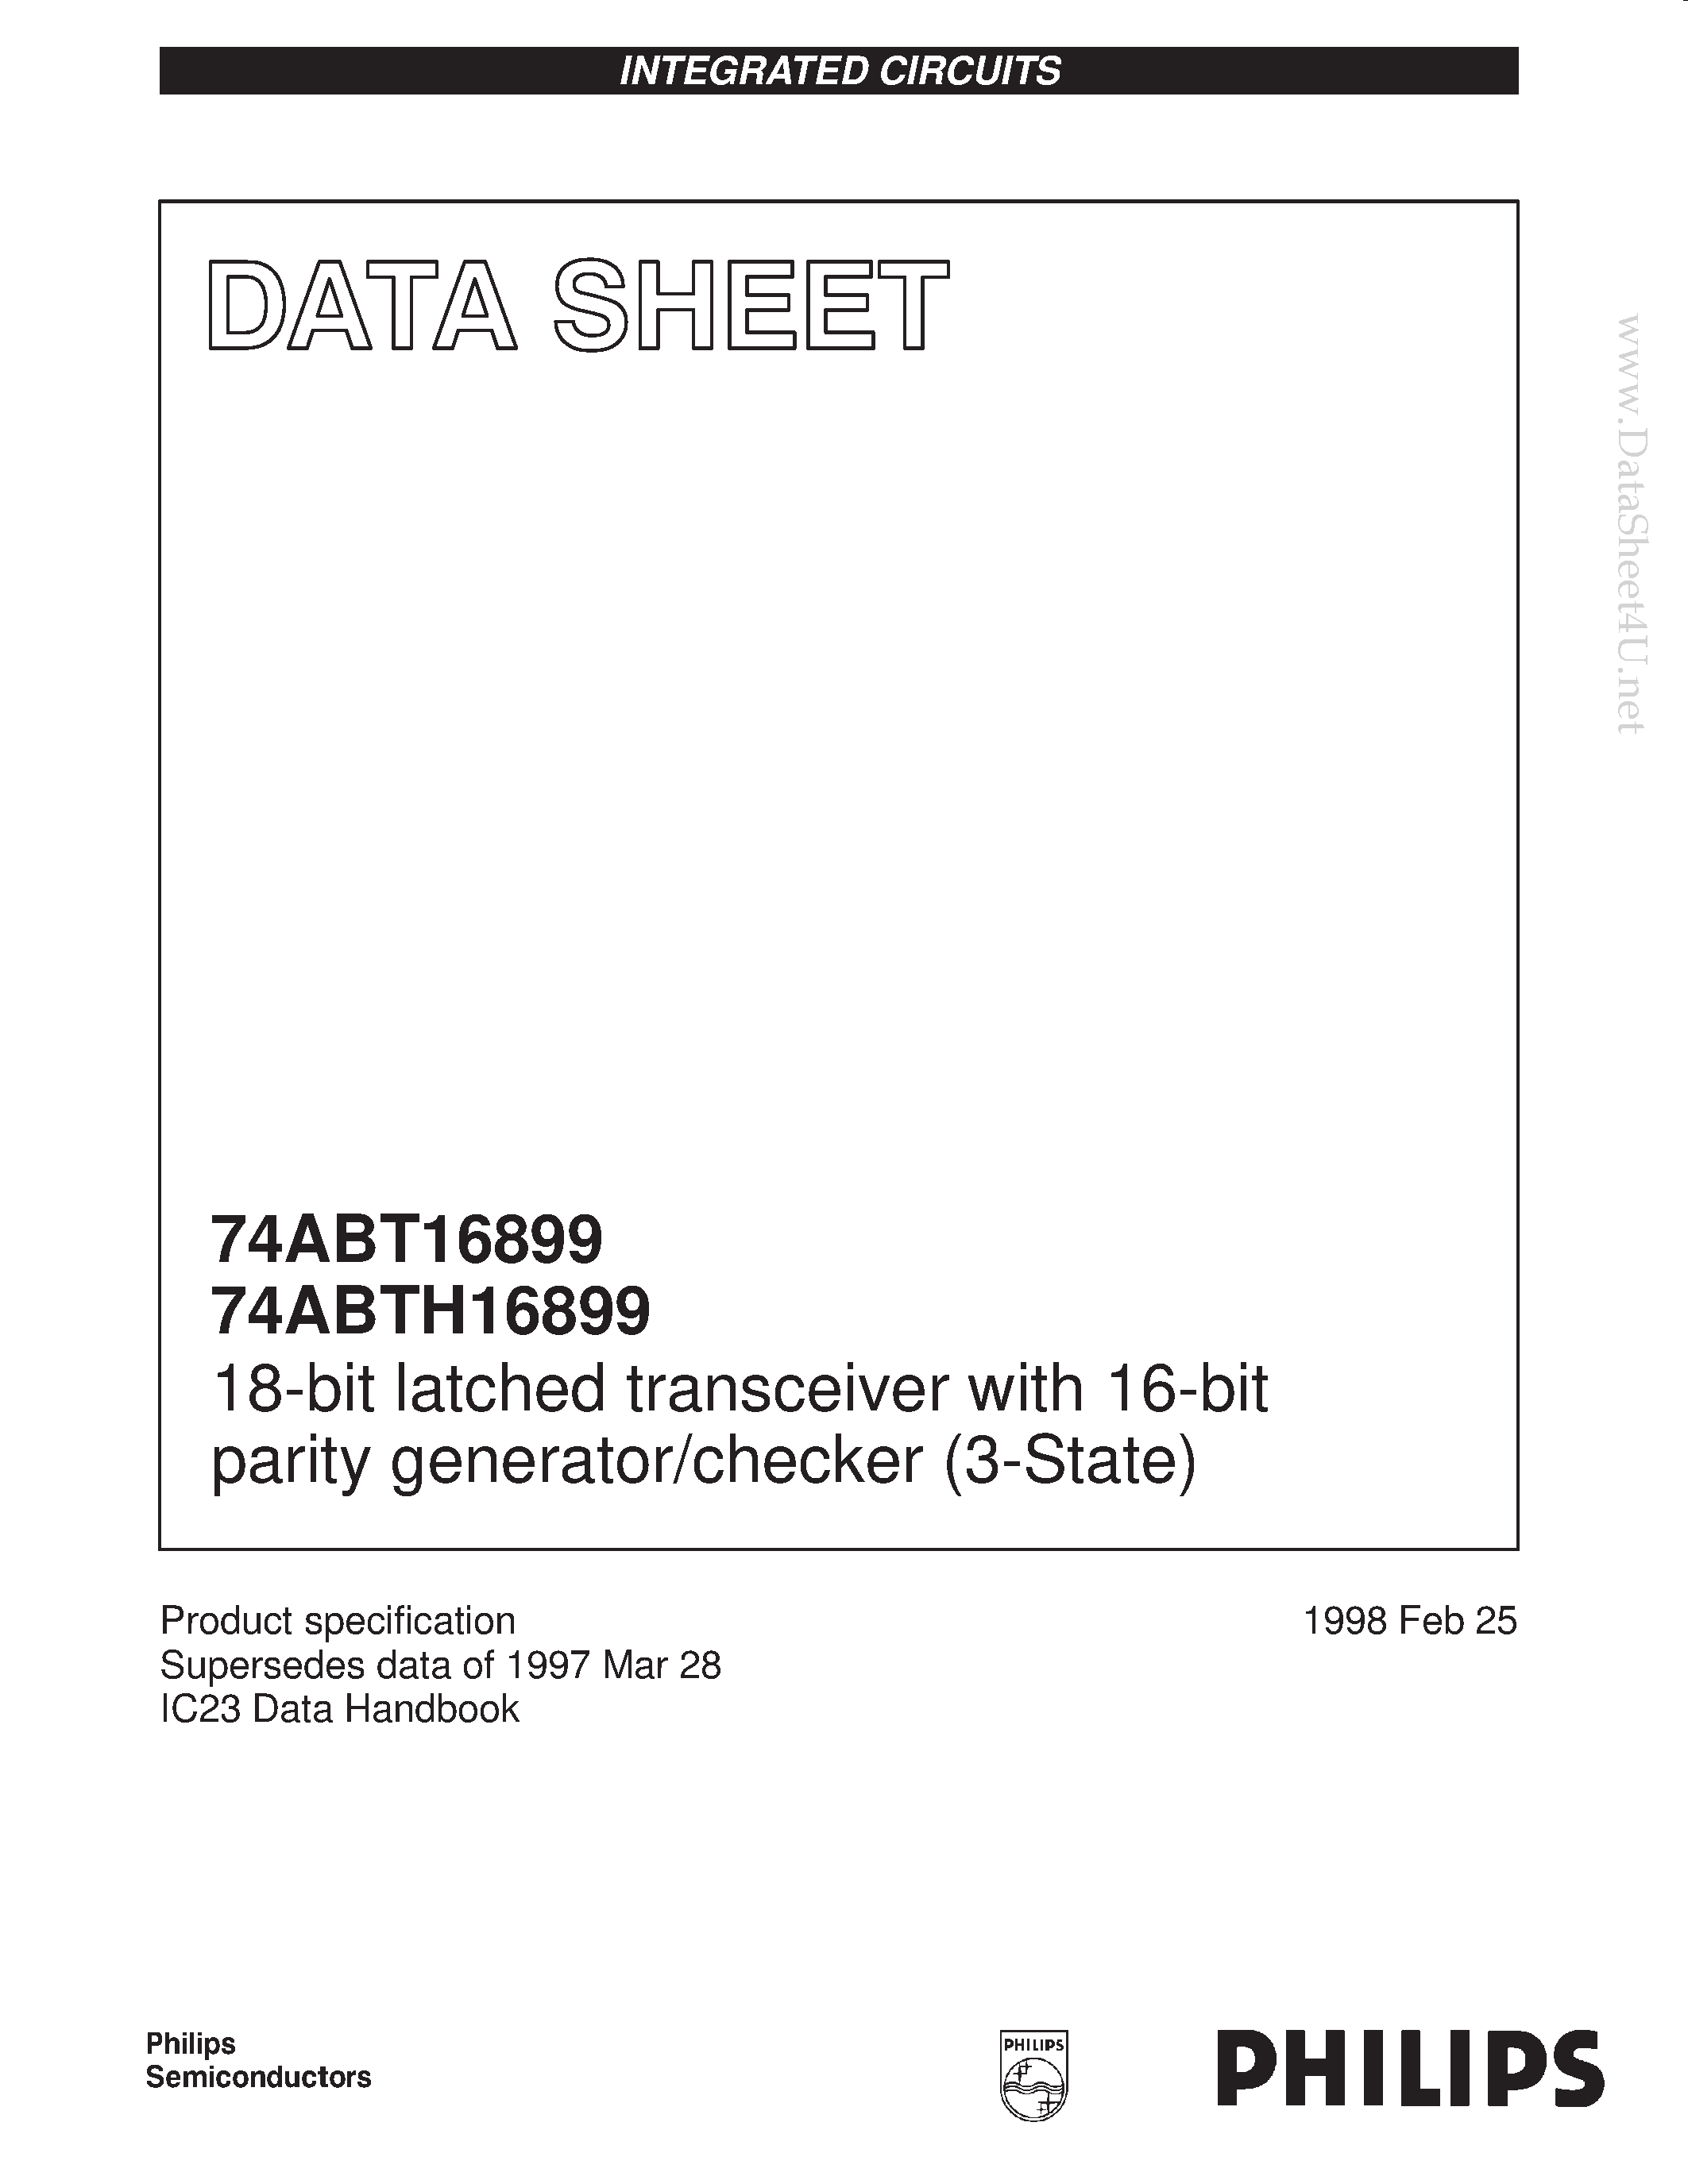 Даташит 74ABTH16899DL - 18-bit latched transceiver with 16-bit parity generator/checker 3-State страница 1